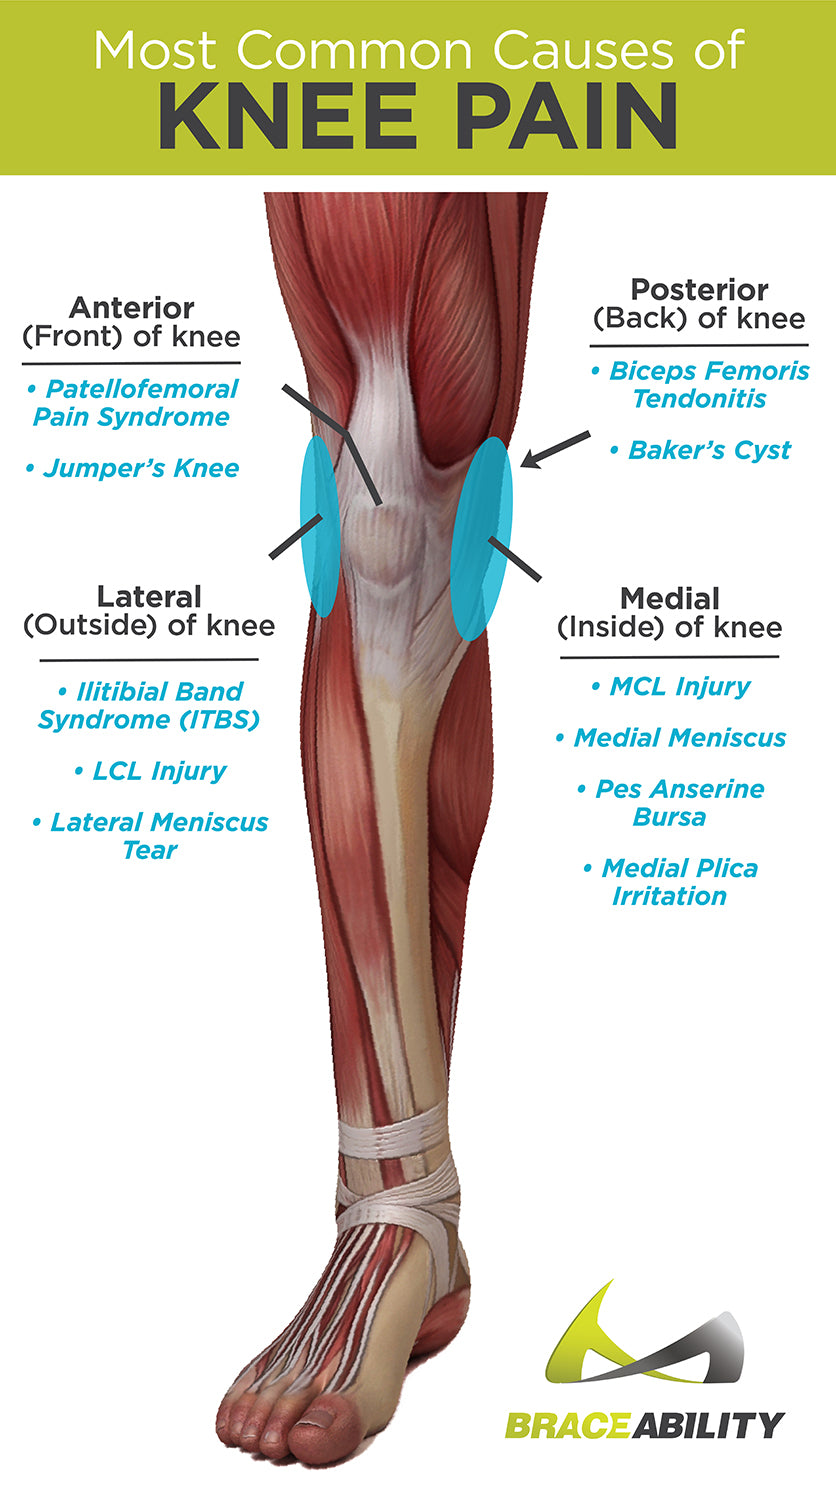 Types of knee pain and what causes anterior, posterior, medial and lateral knee pain problems